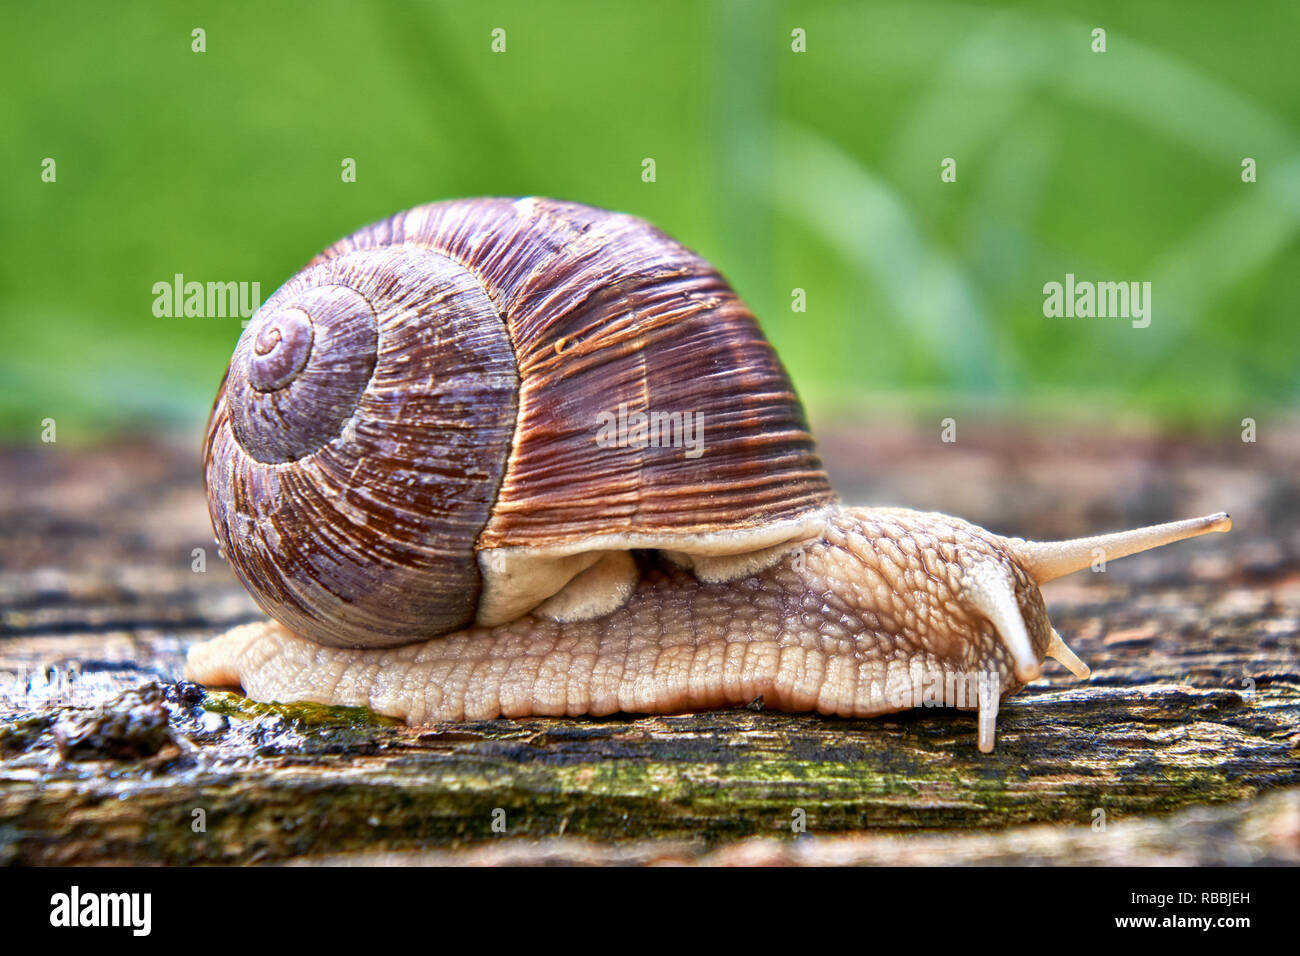 Helix pomatia also Roman snail or burgundy snail is a large air-breathing land snail. Pulmonary Gastropod Mollusk, family Helicidae Stock Photo